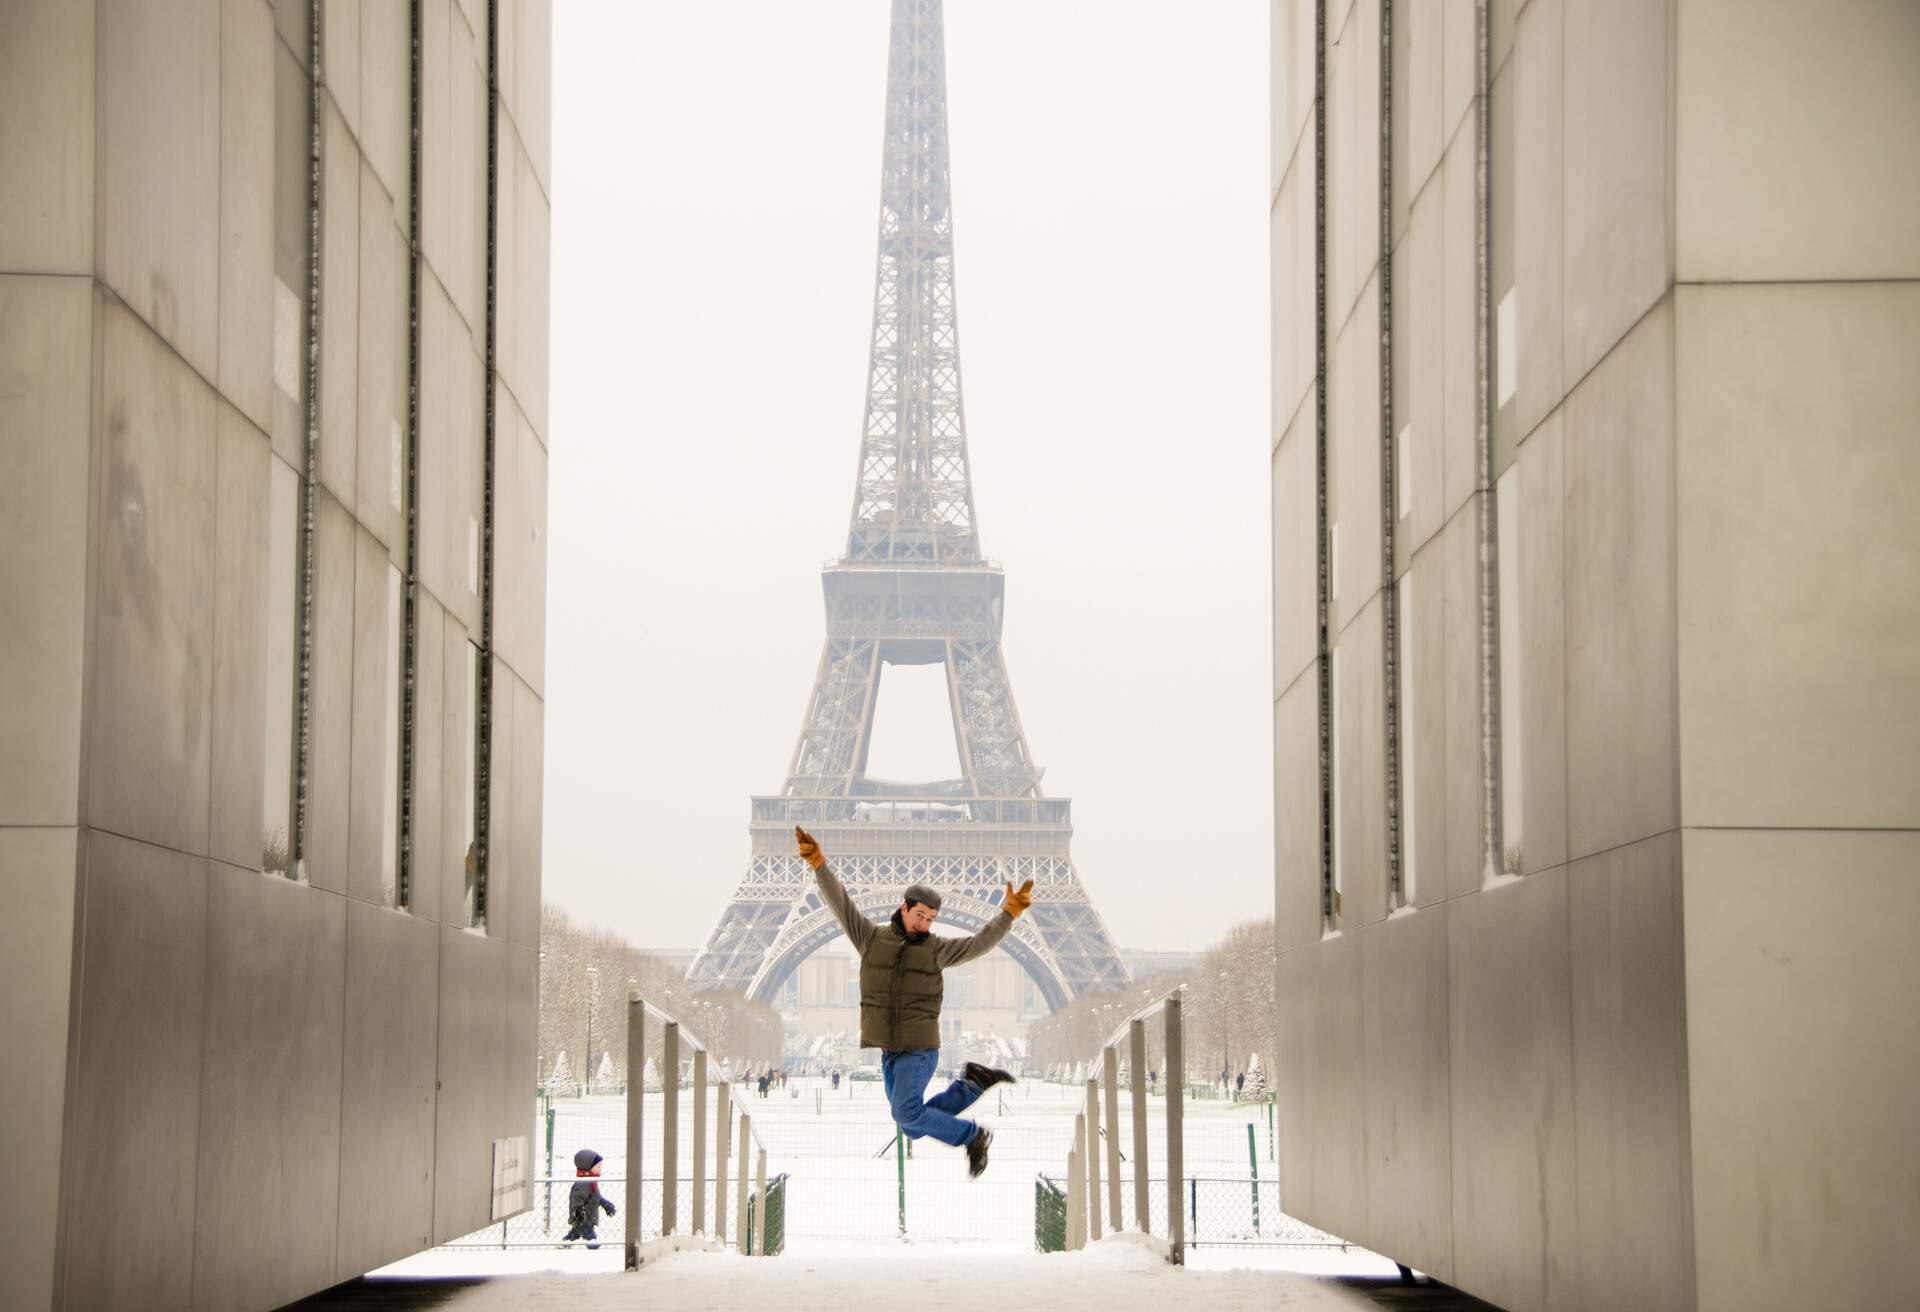 A man in winter jacket jumps between two identical walls against the backdrop of the Eiffel Tower.